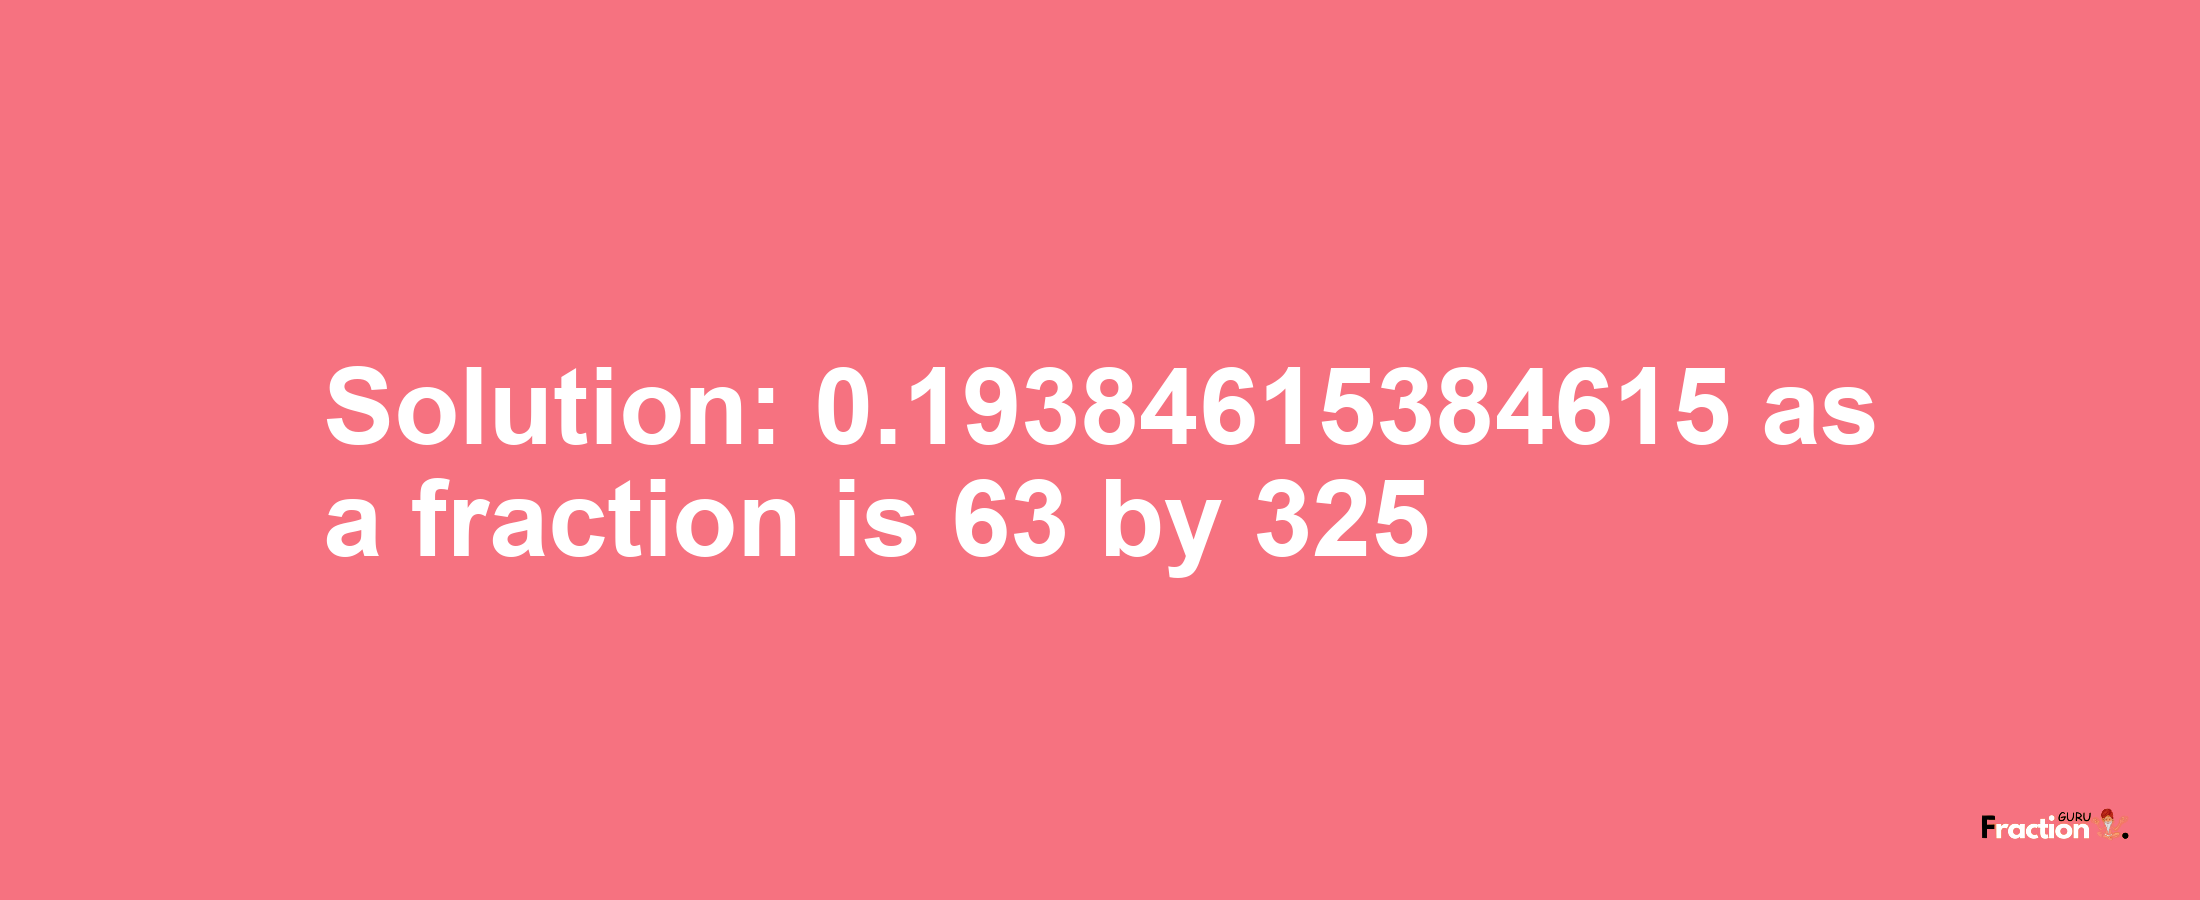 Solution:0.19384615384615 as a fraction is 63/325